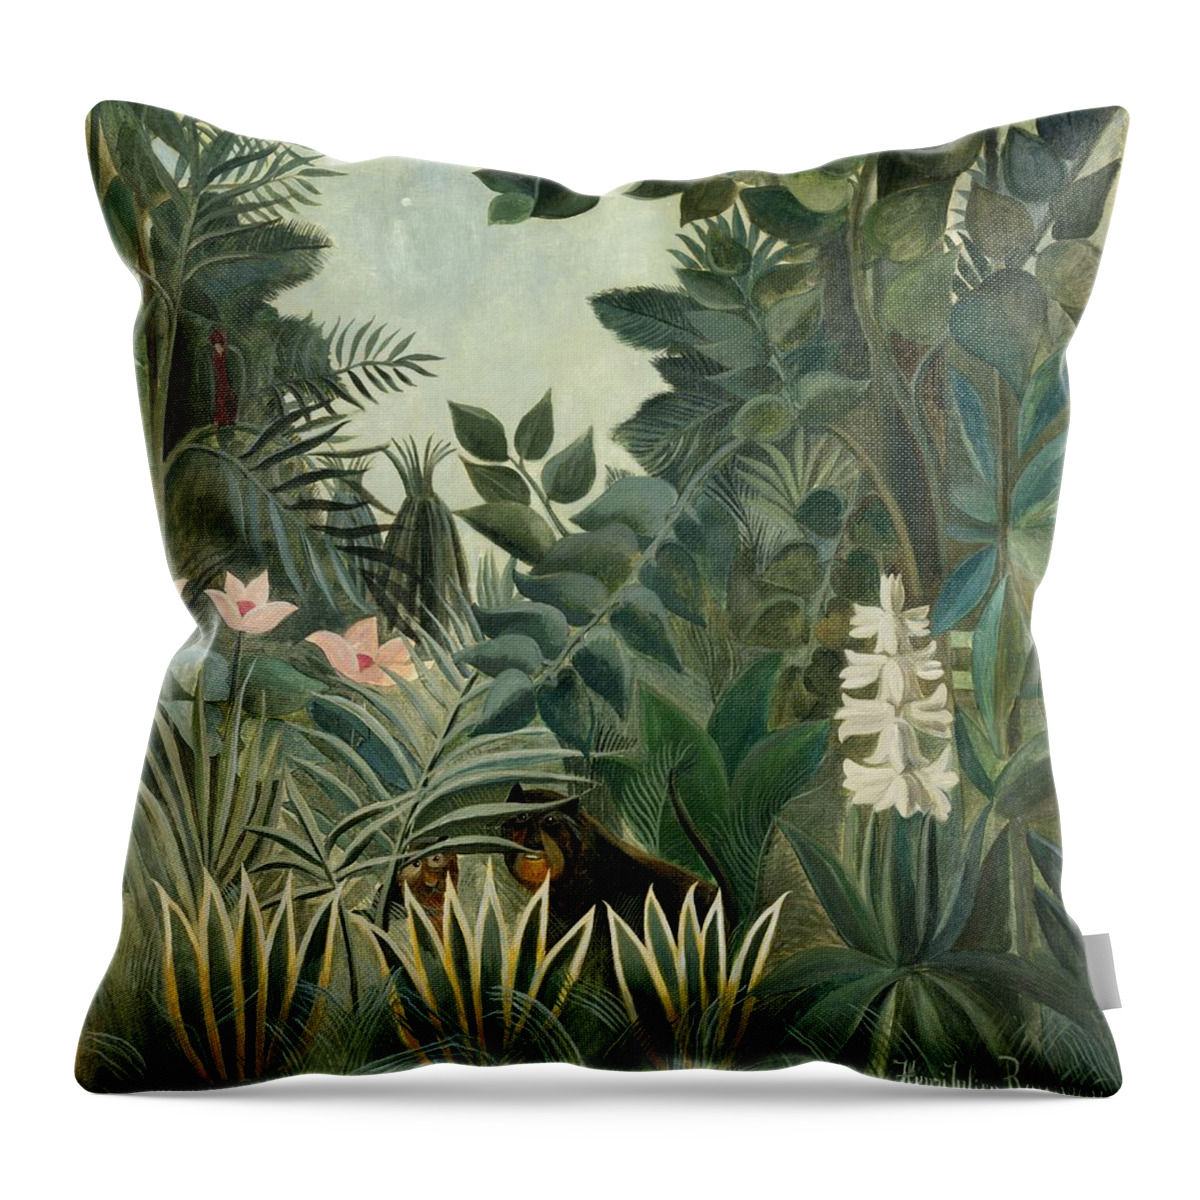 Henri Rousseau Throw Pillow featuring the painting The Equatorial Jungle #2 by Henri Rousseau